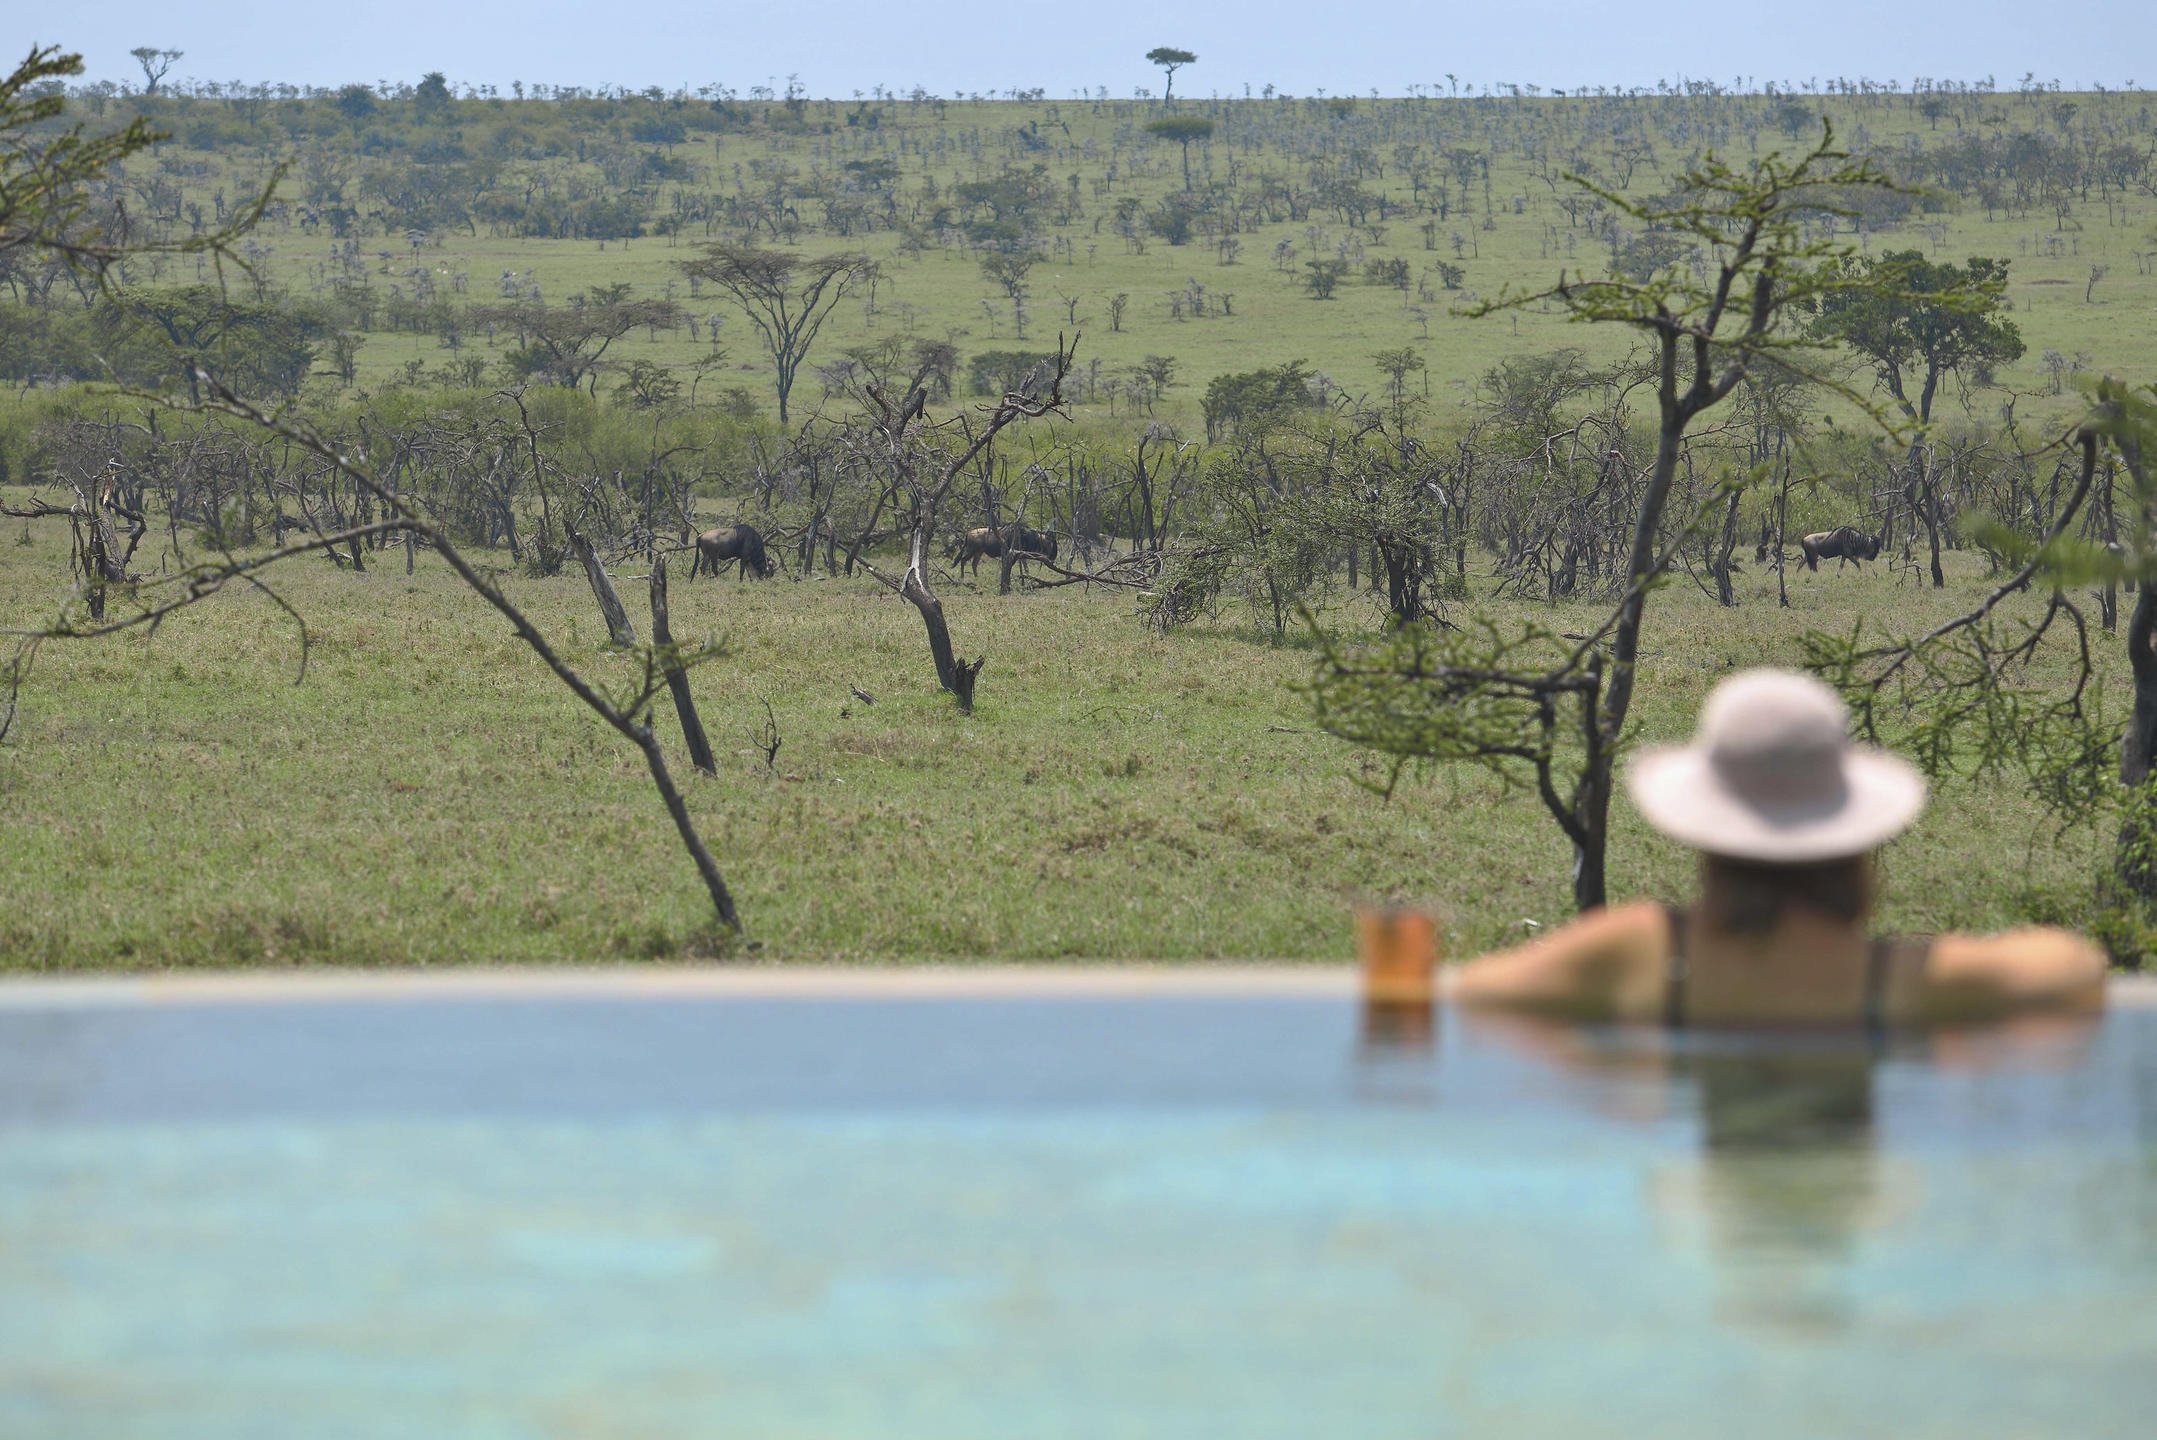 Lodges and Camps in the Greater Mara with Swimming Pools